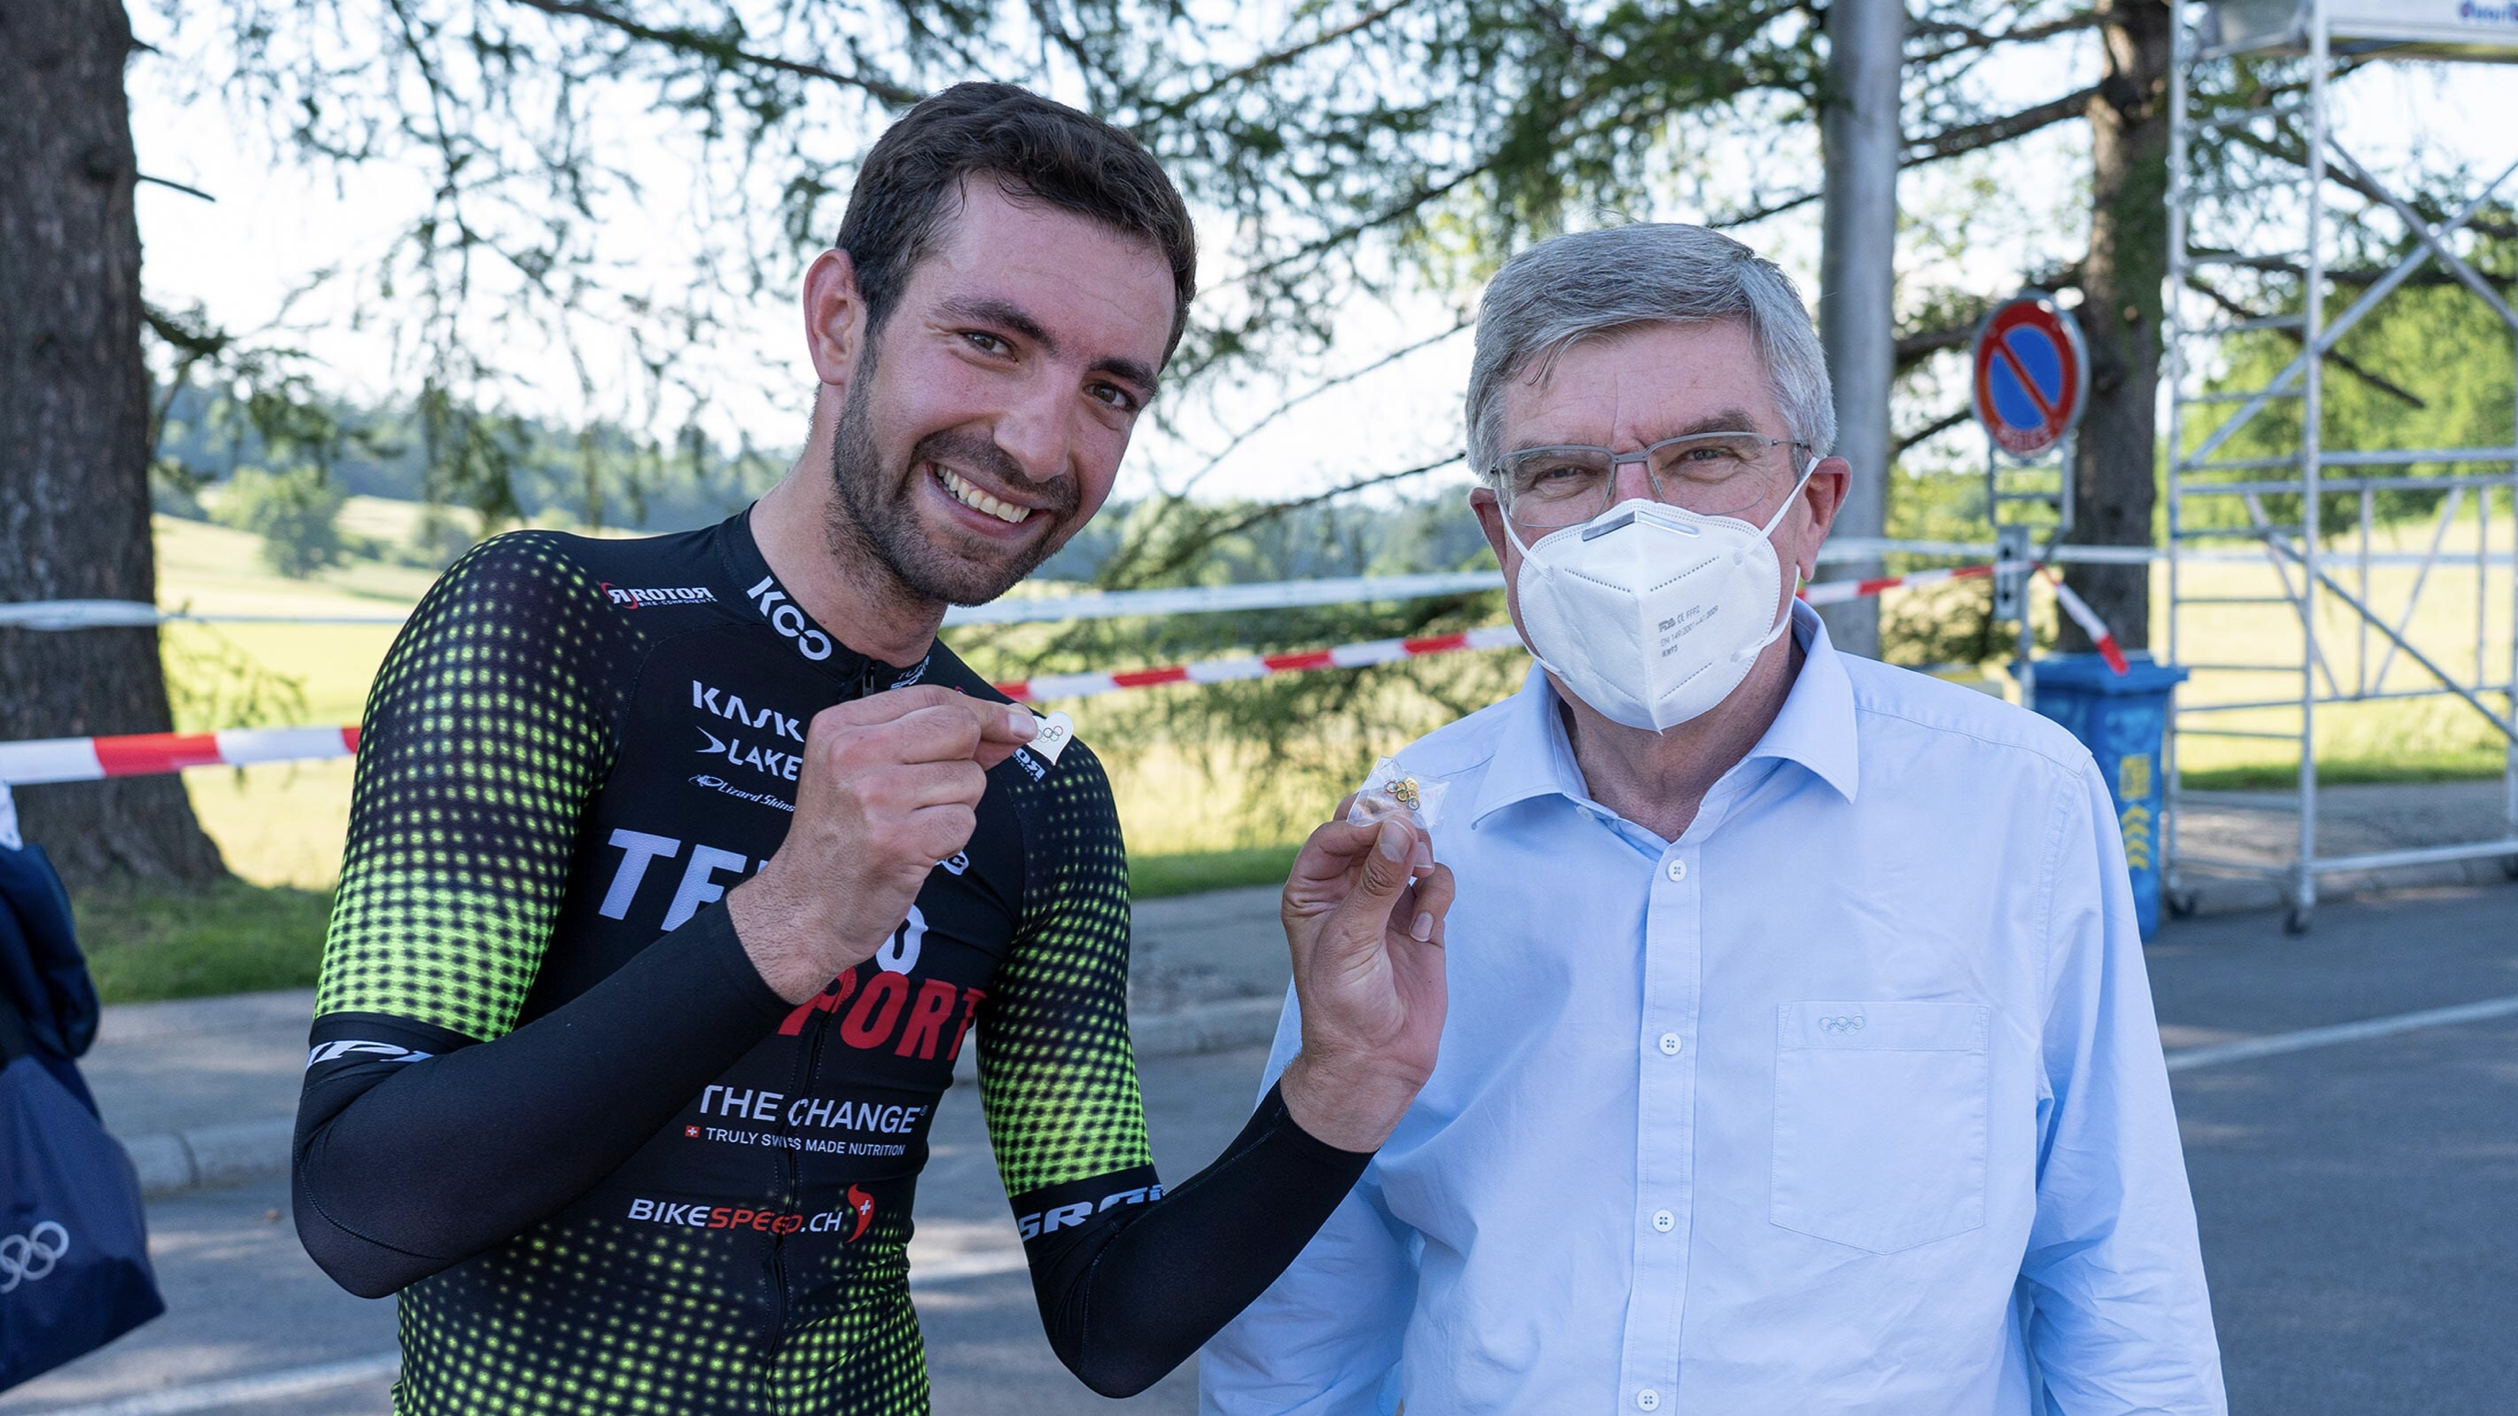  Thomas Bach, president of the International Olympic Committee (IOC), right, was at the Swiss National Cycling Time Trials to support Ahmad Badreddin Wais, one of the newly selected athletes on the IOC Refugee Olympic Team Tokyo 2020. June 16, 2021, Lausanne, Switzerland (Photo courtesy IOC) Posted for media use 